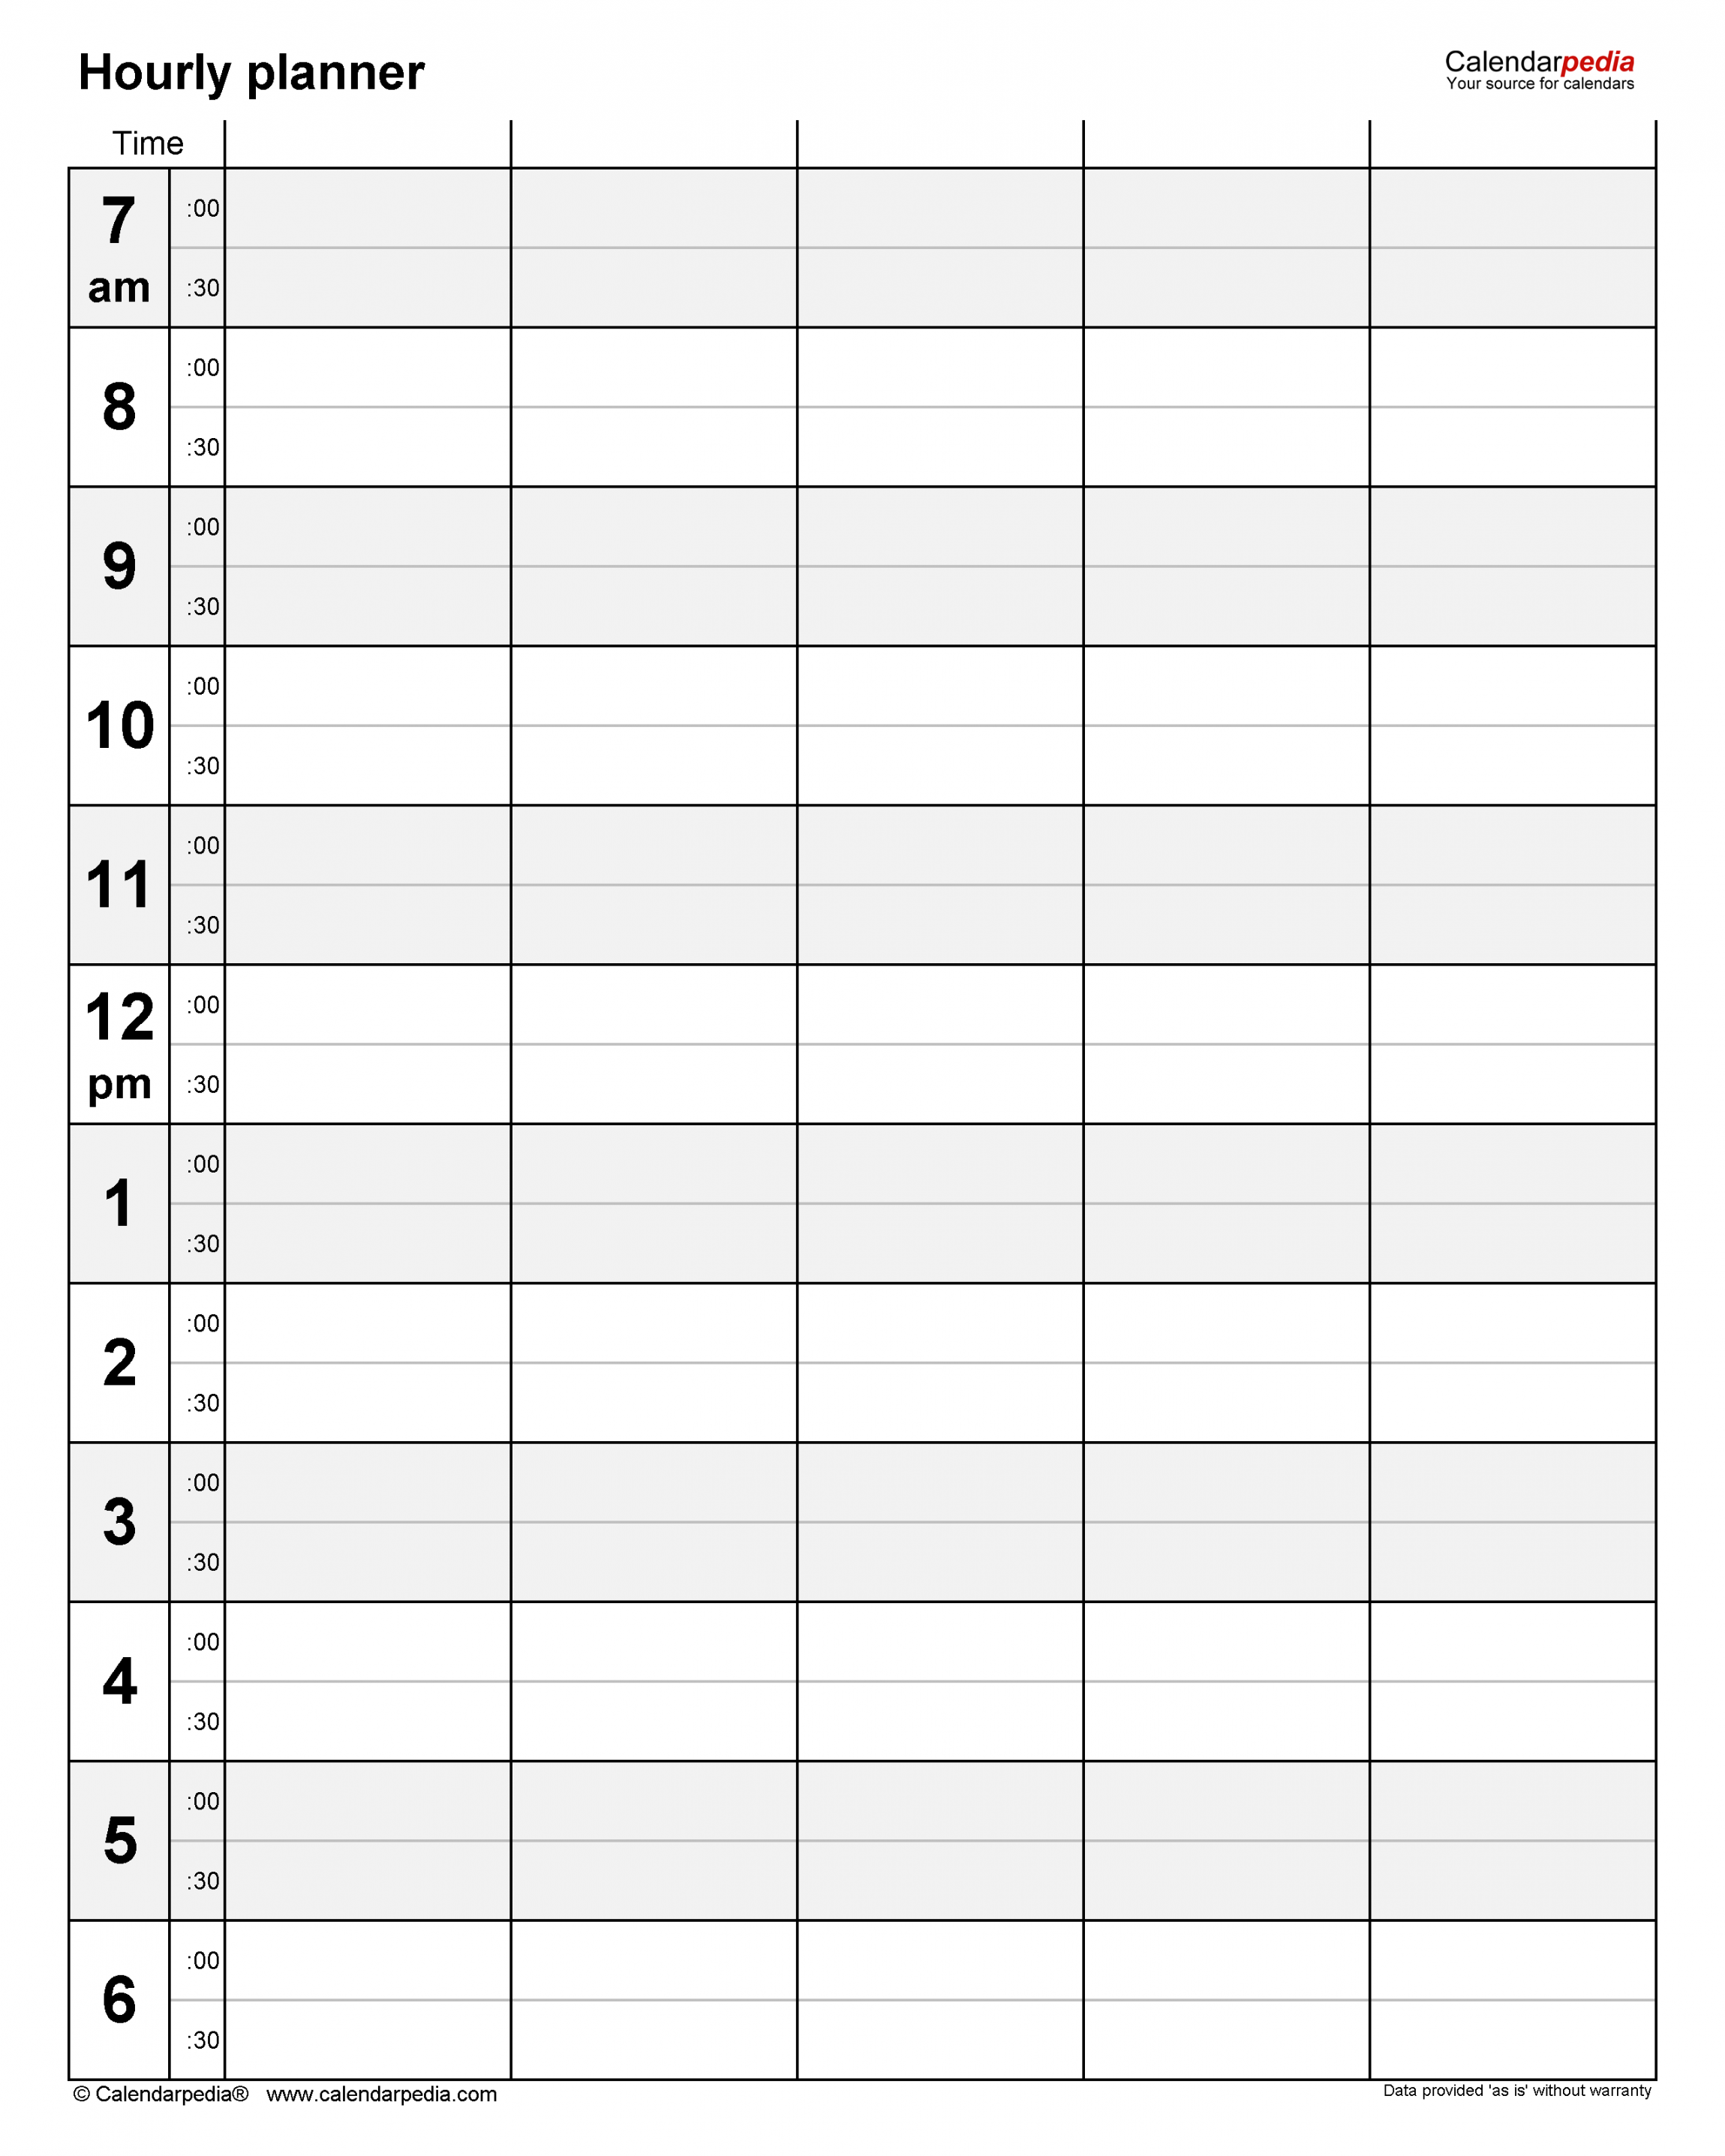 Free Hourly Planners in PDF Format - + Templates